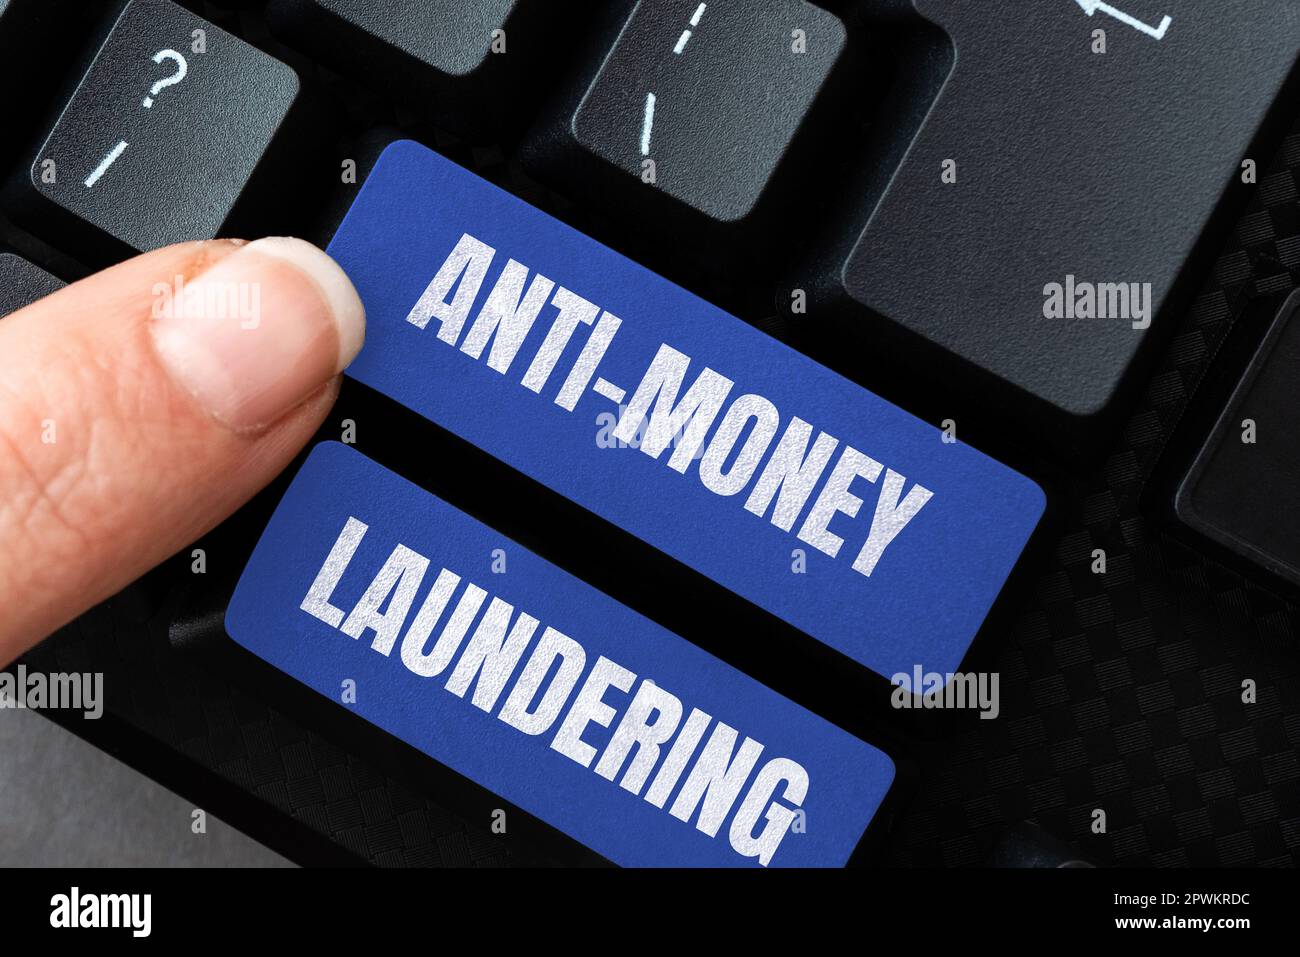 Handwriting text Anti Money Laundering, Business overview stop generating income through illegal actions Stock Photo